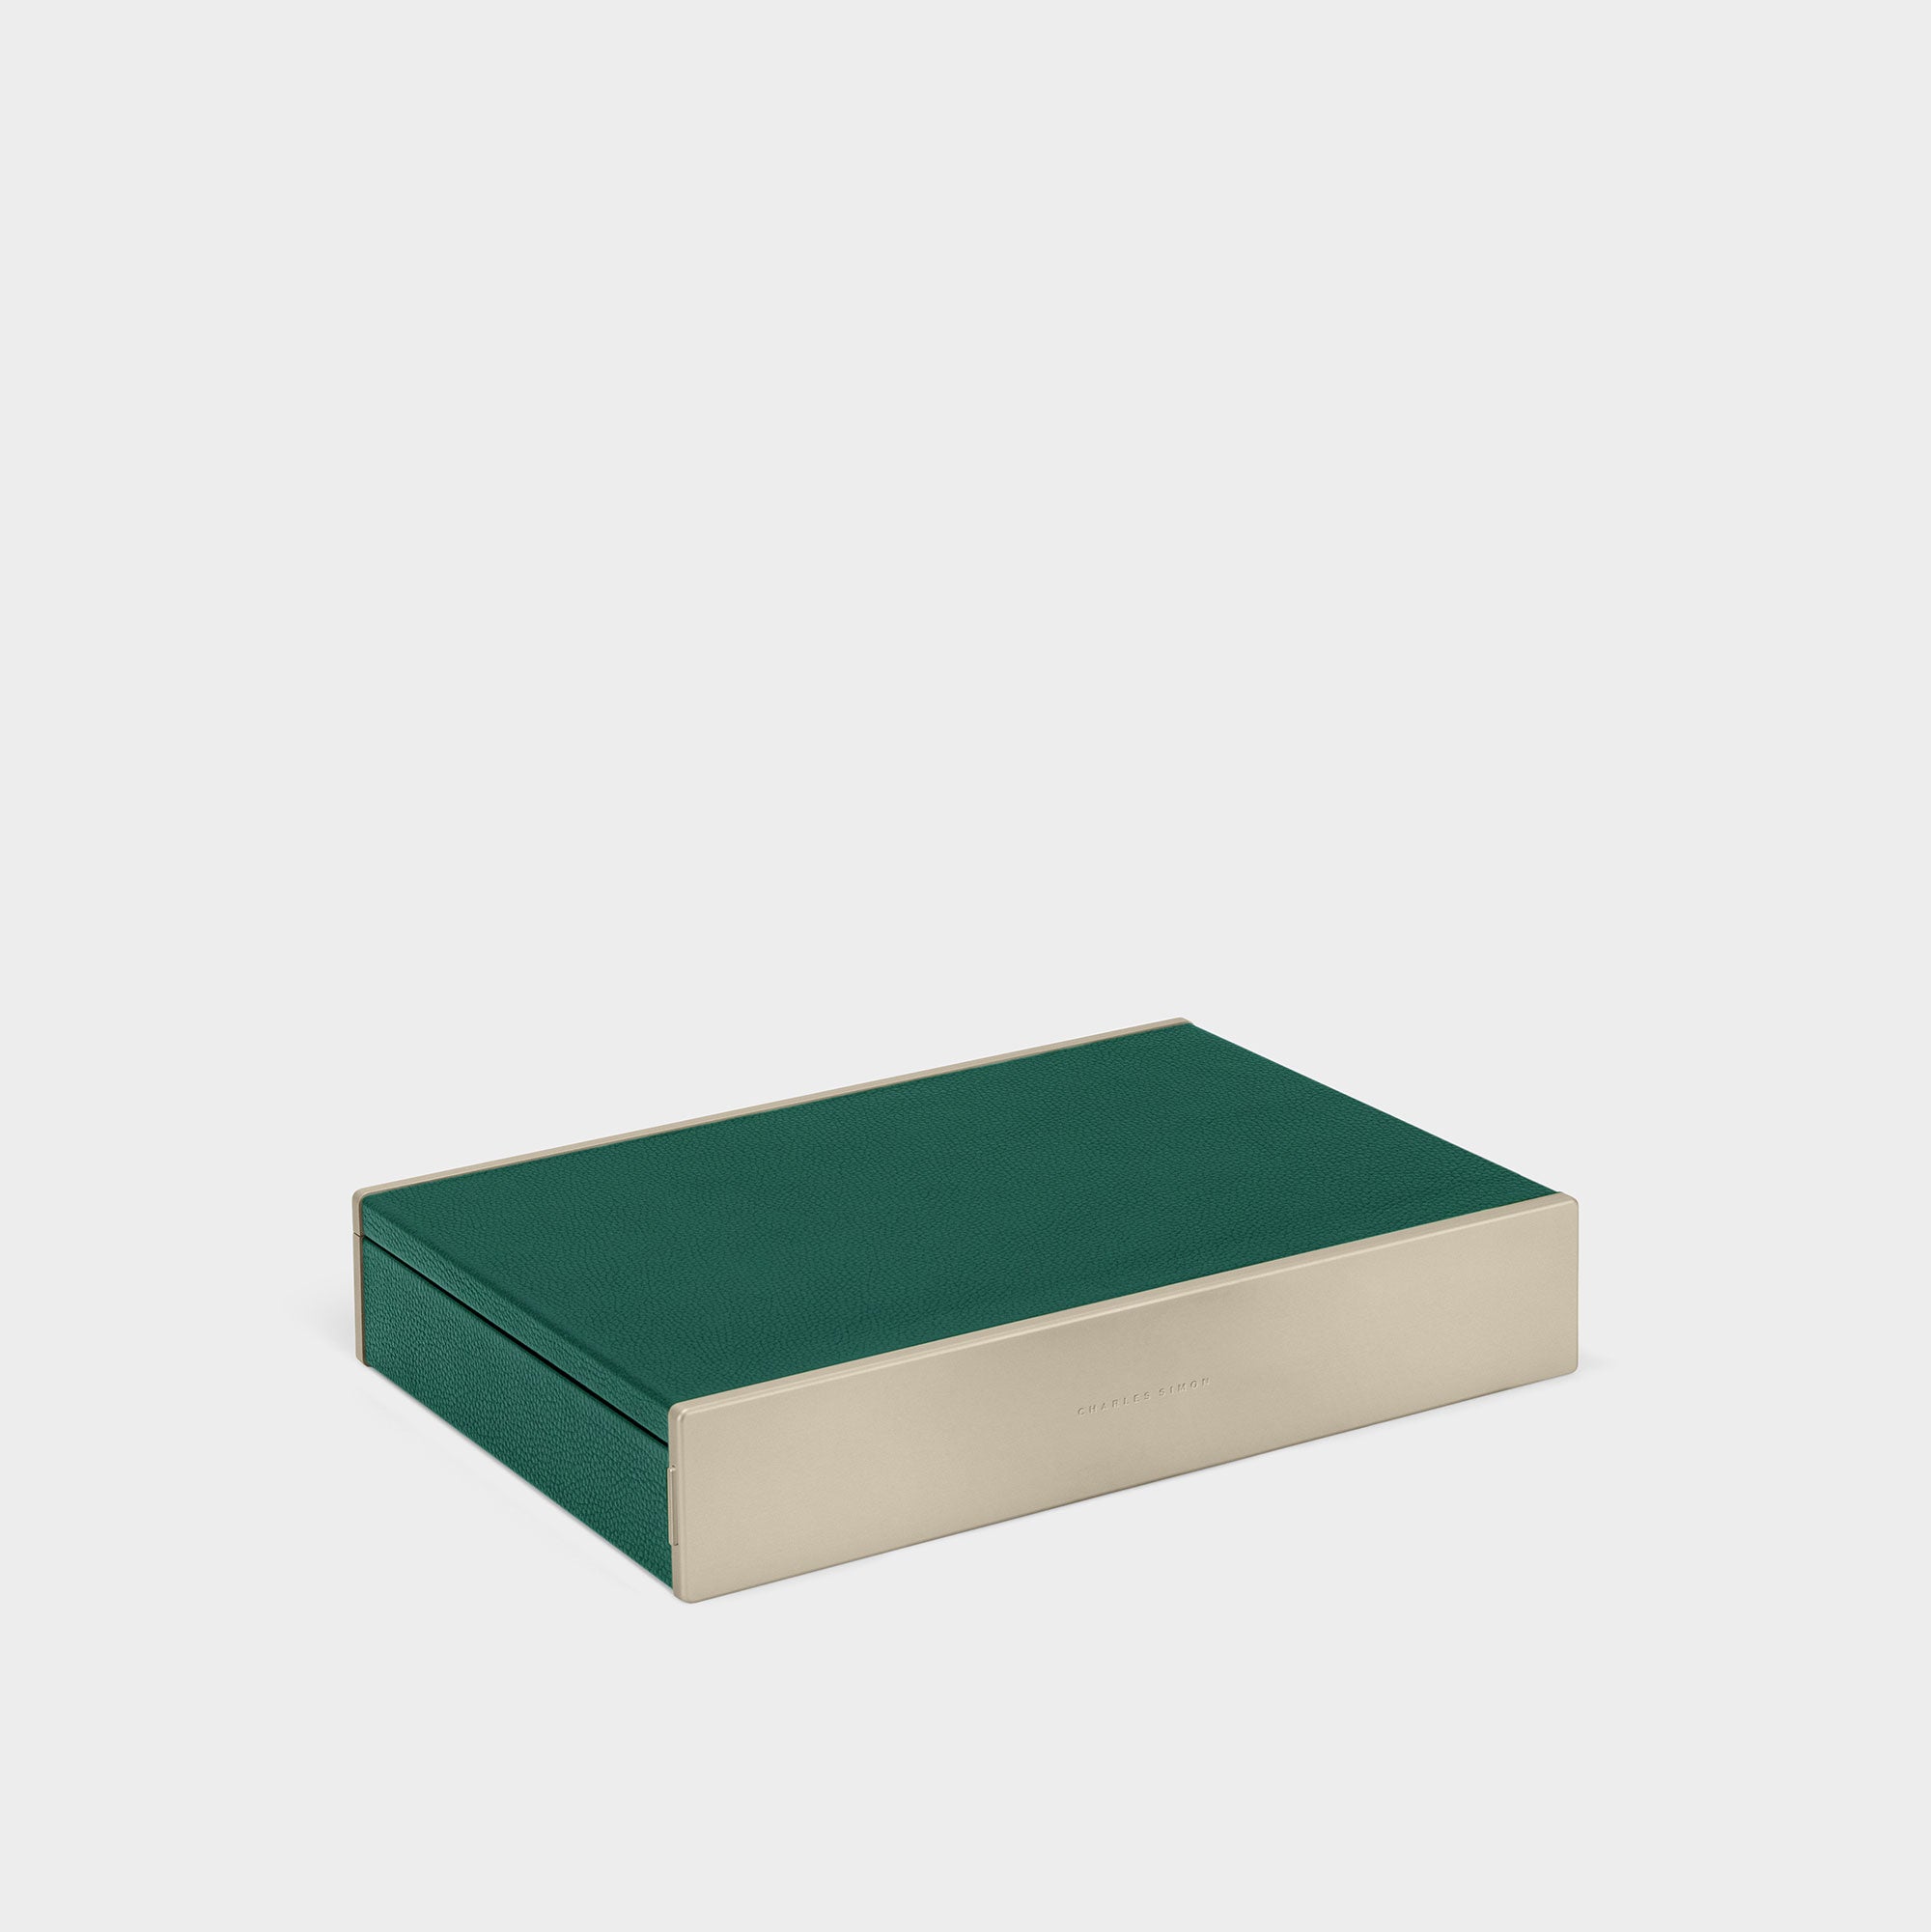 Product photo of closed Spence 12 Watch box in emerald leather and gold aluminum